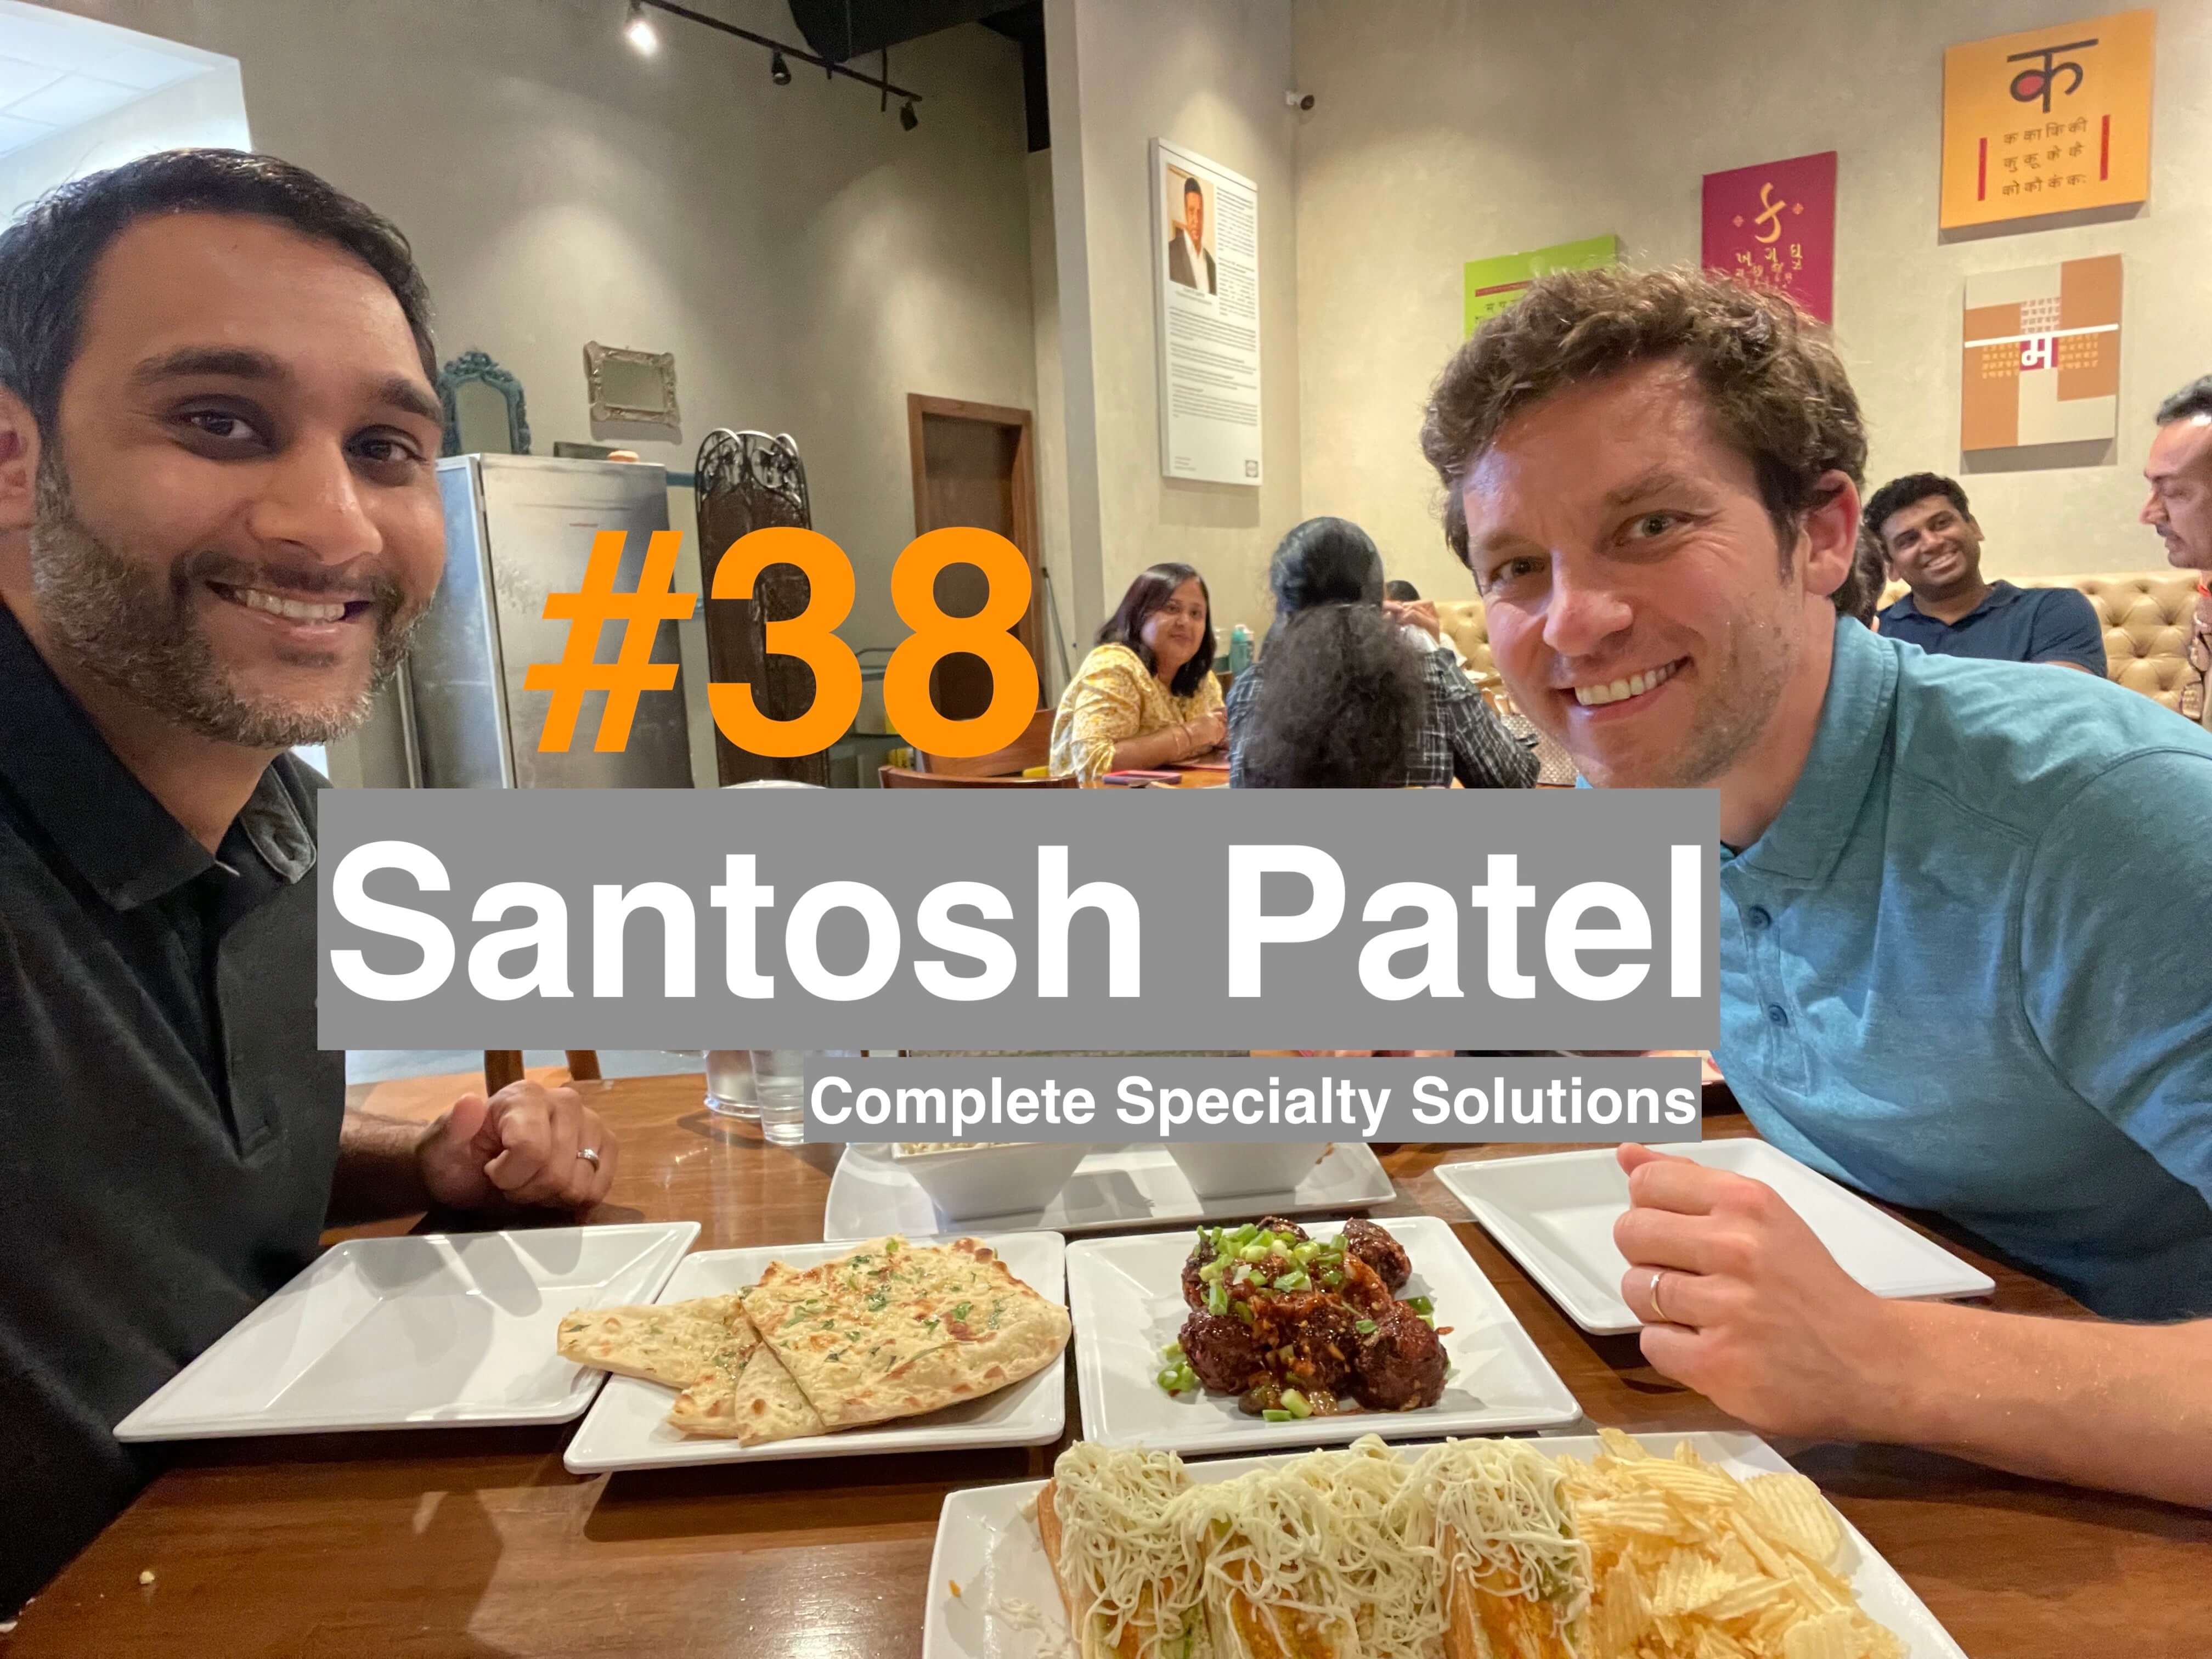 Episode#38 Santosh Patel on building Complete Specialty Solutions through perseverance and abundance mindset, why specialists burn out, and why AI will be so revolutionary in dentistry